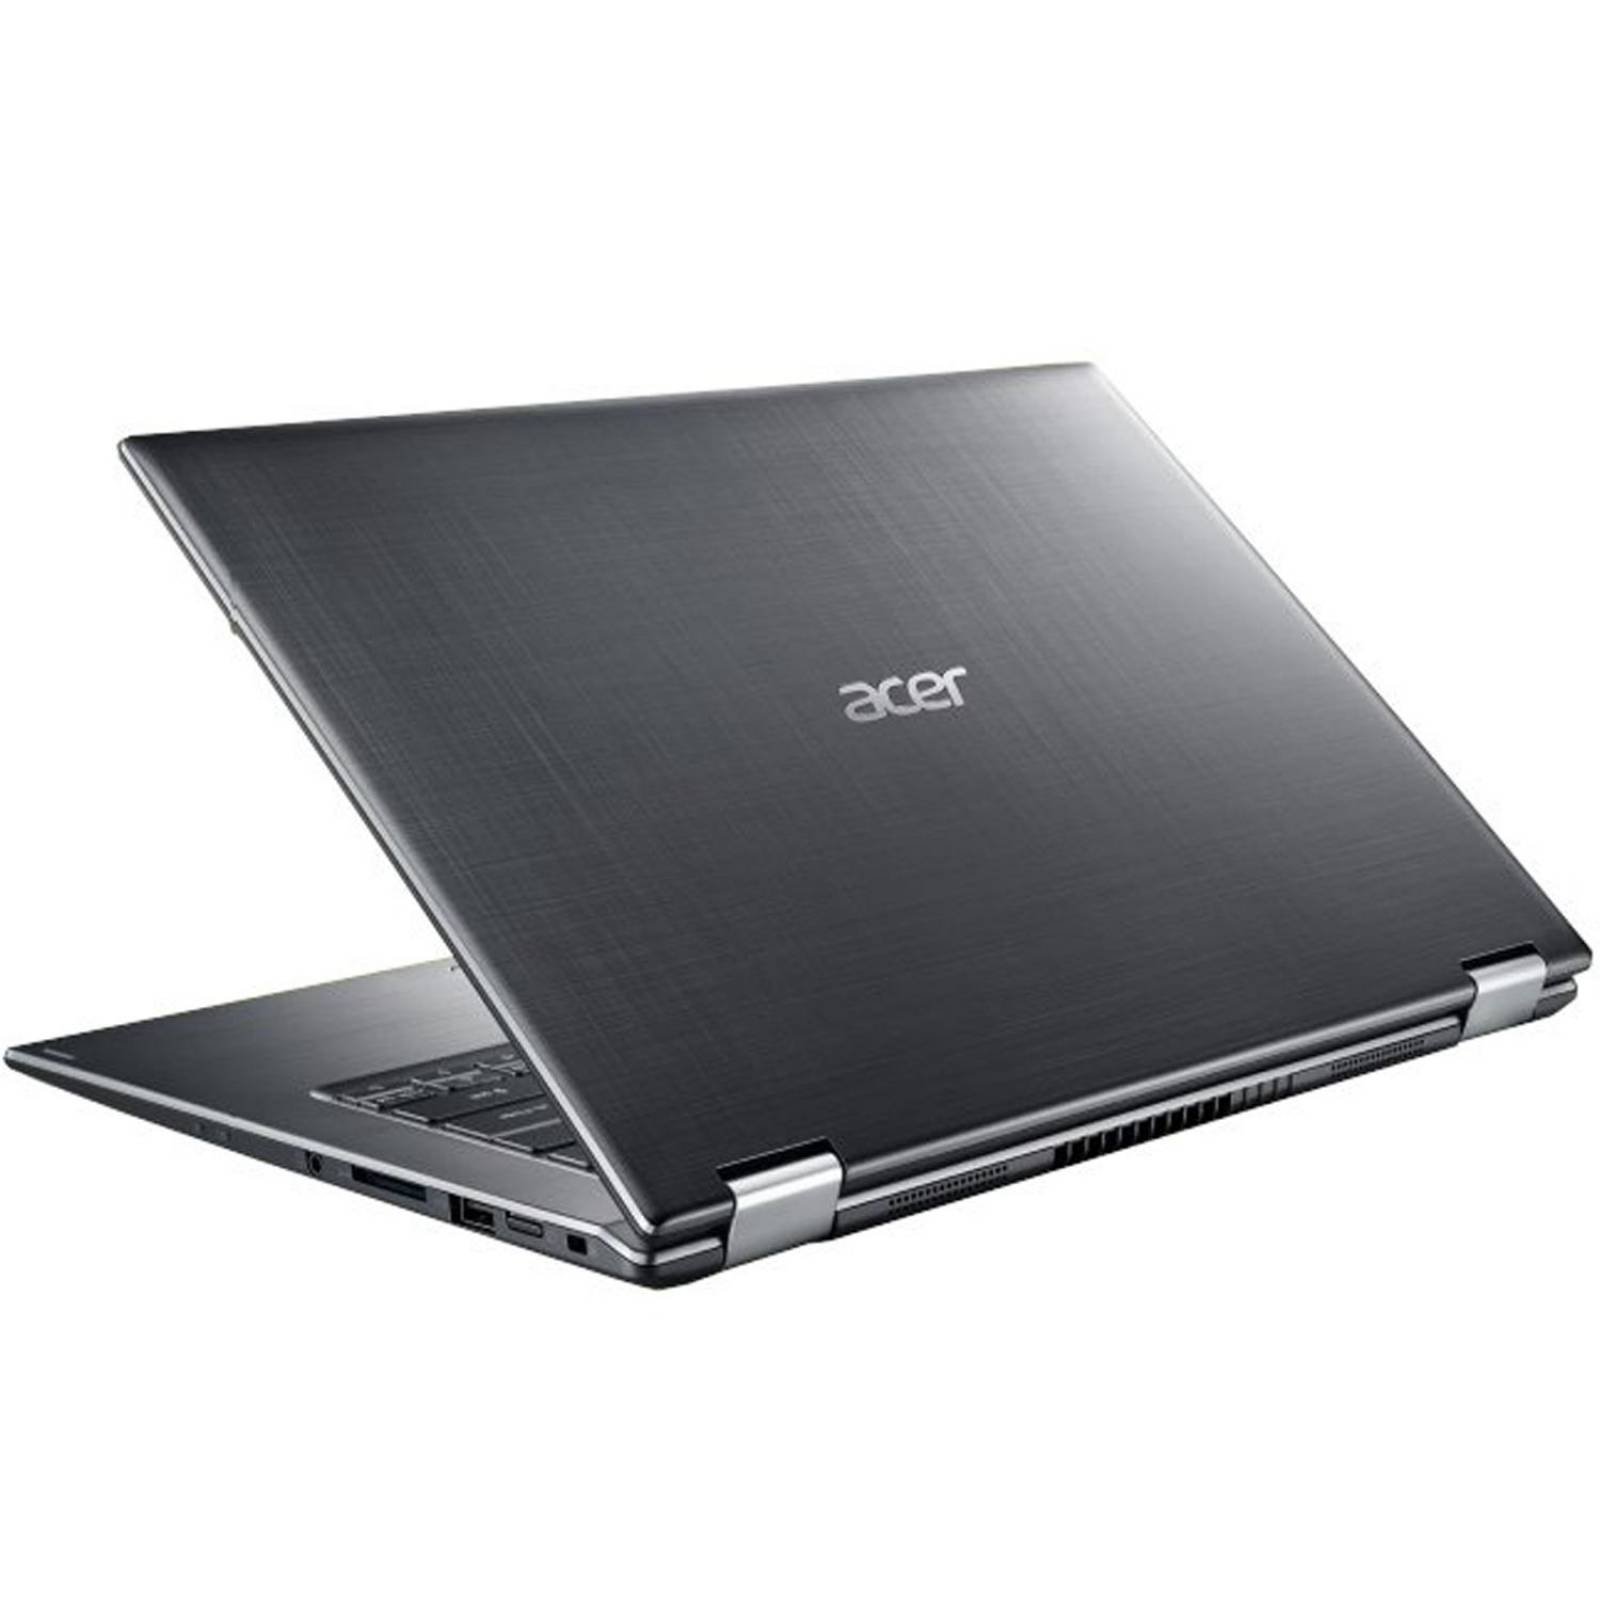 Laptop ACER SPIN 3 I3-8130U 4GB 1TB 14 Touch Win10 SP214-51-33WA 